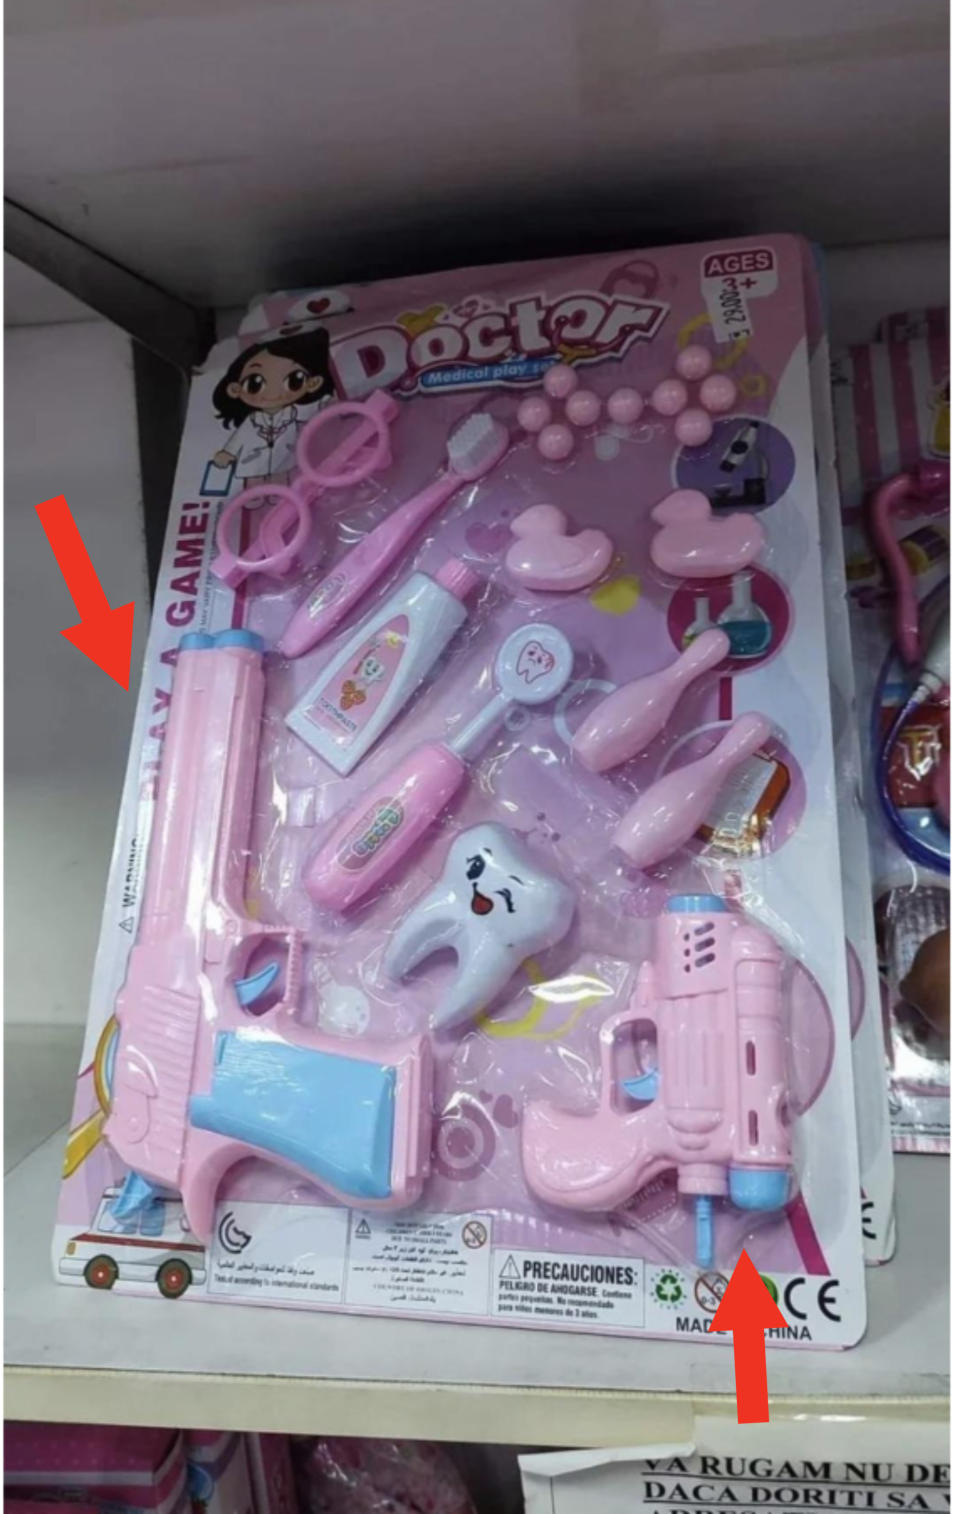 A pink gun in a doctor's toy